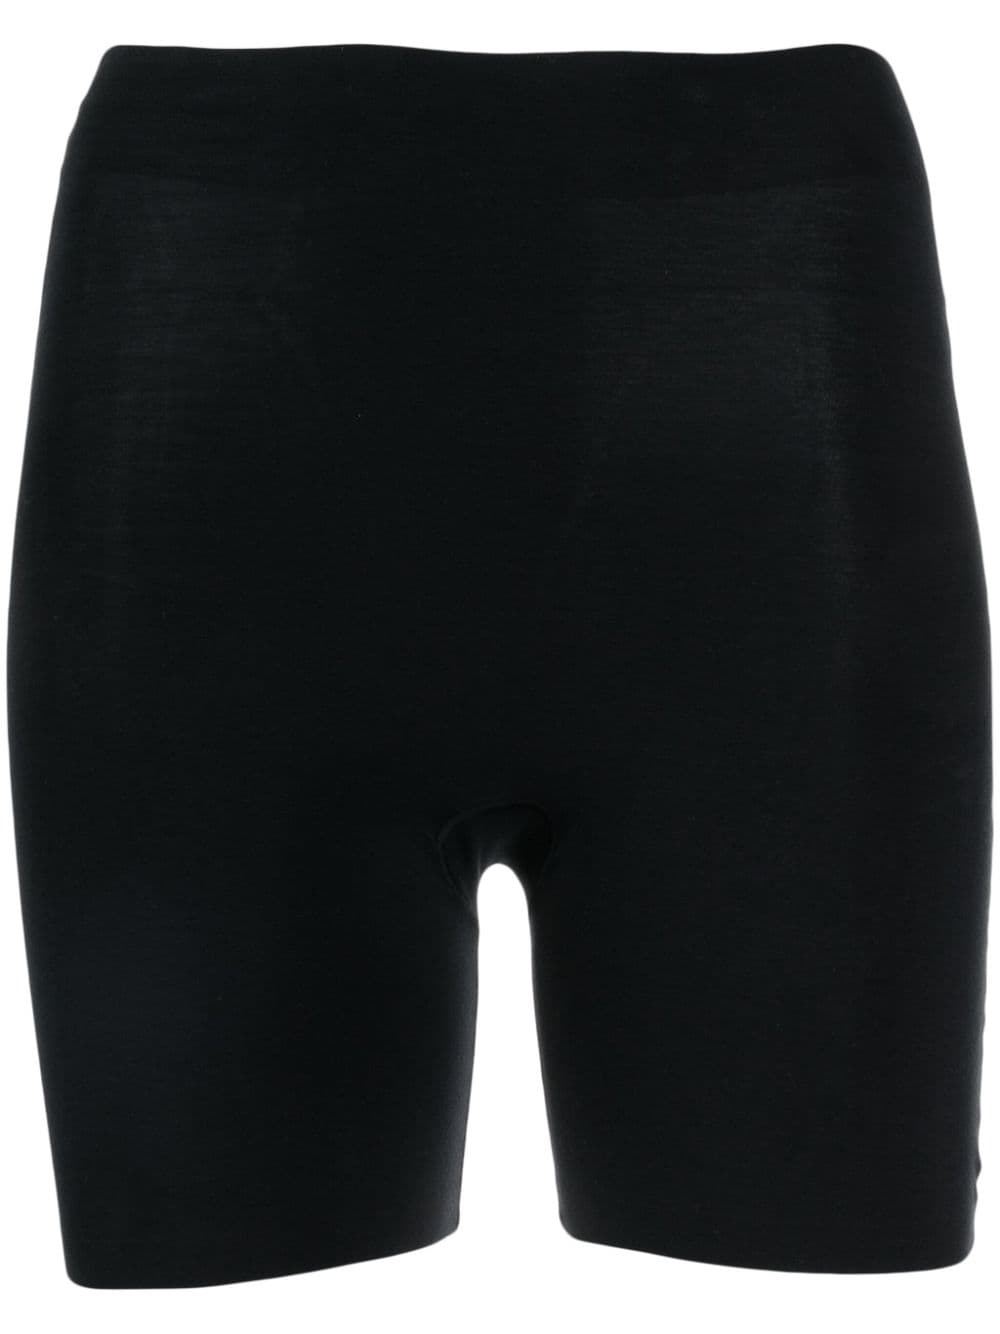 Wolford Contour Control high-waisted shorts - Black von Wolford